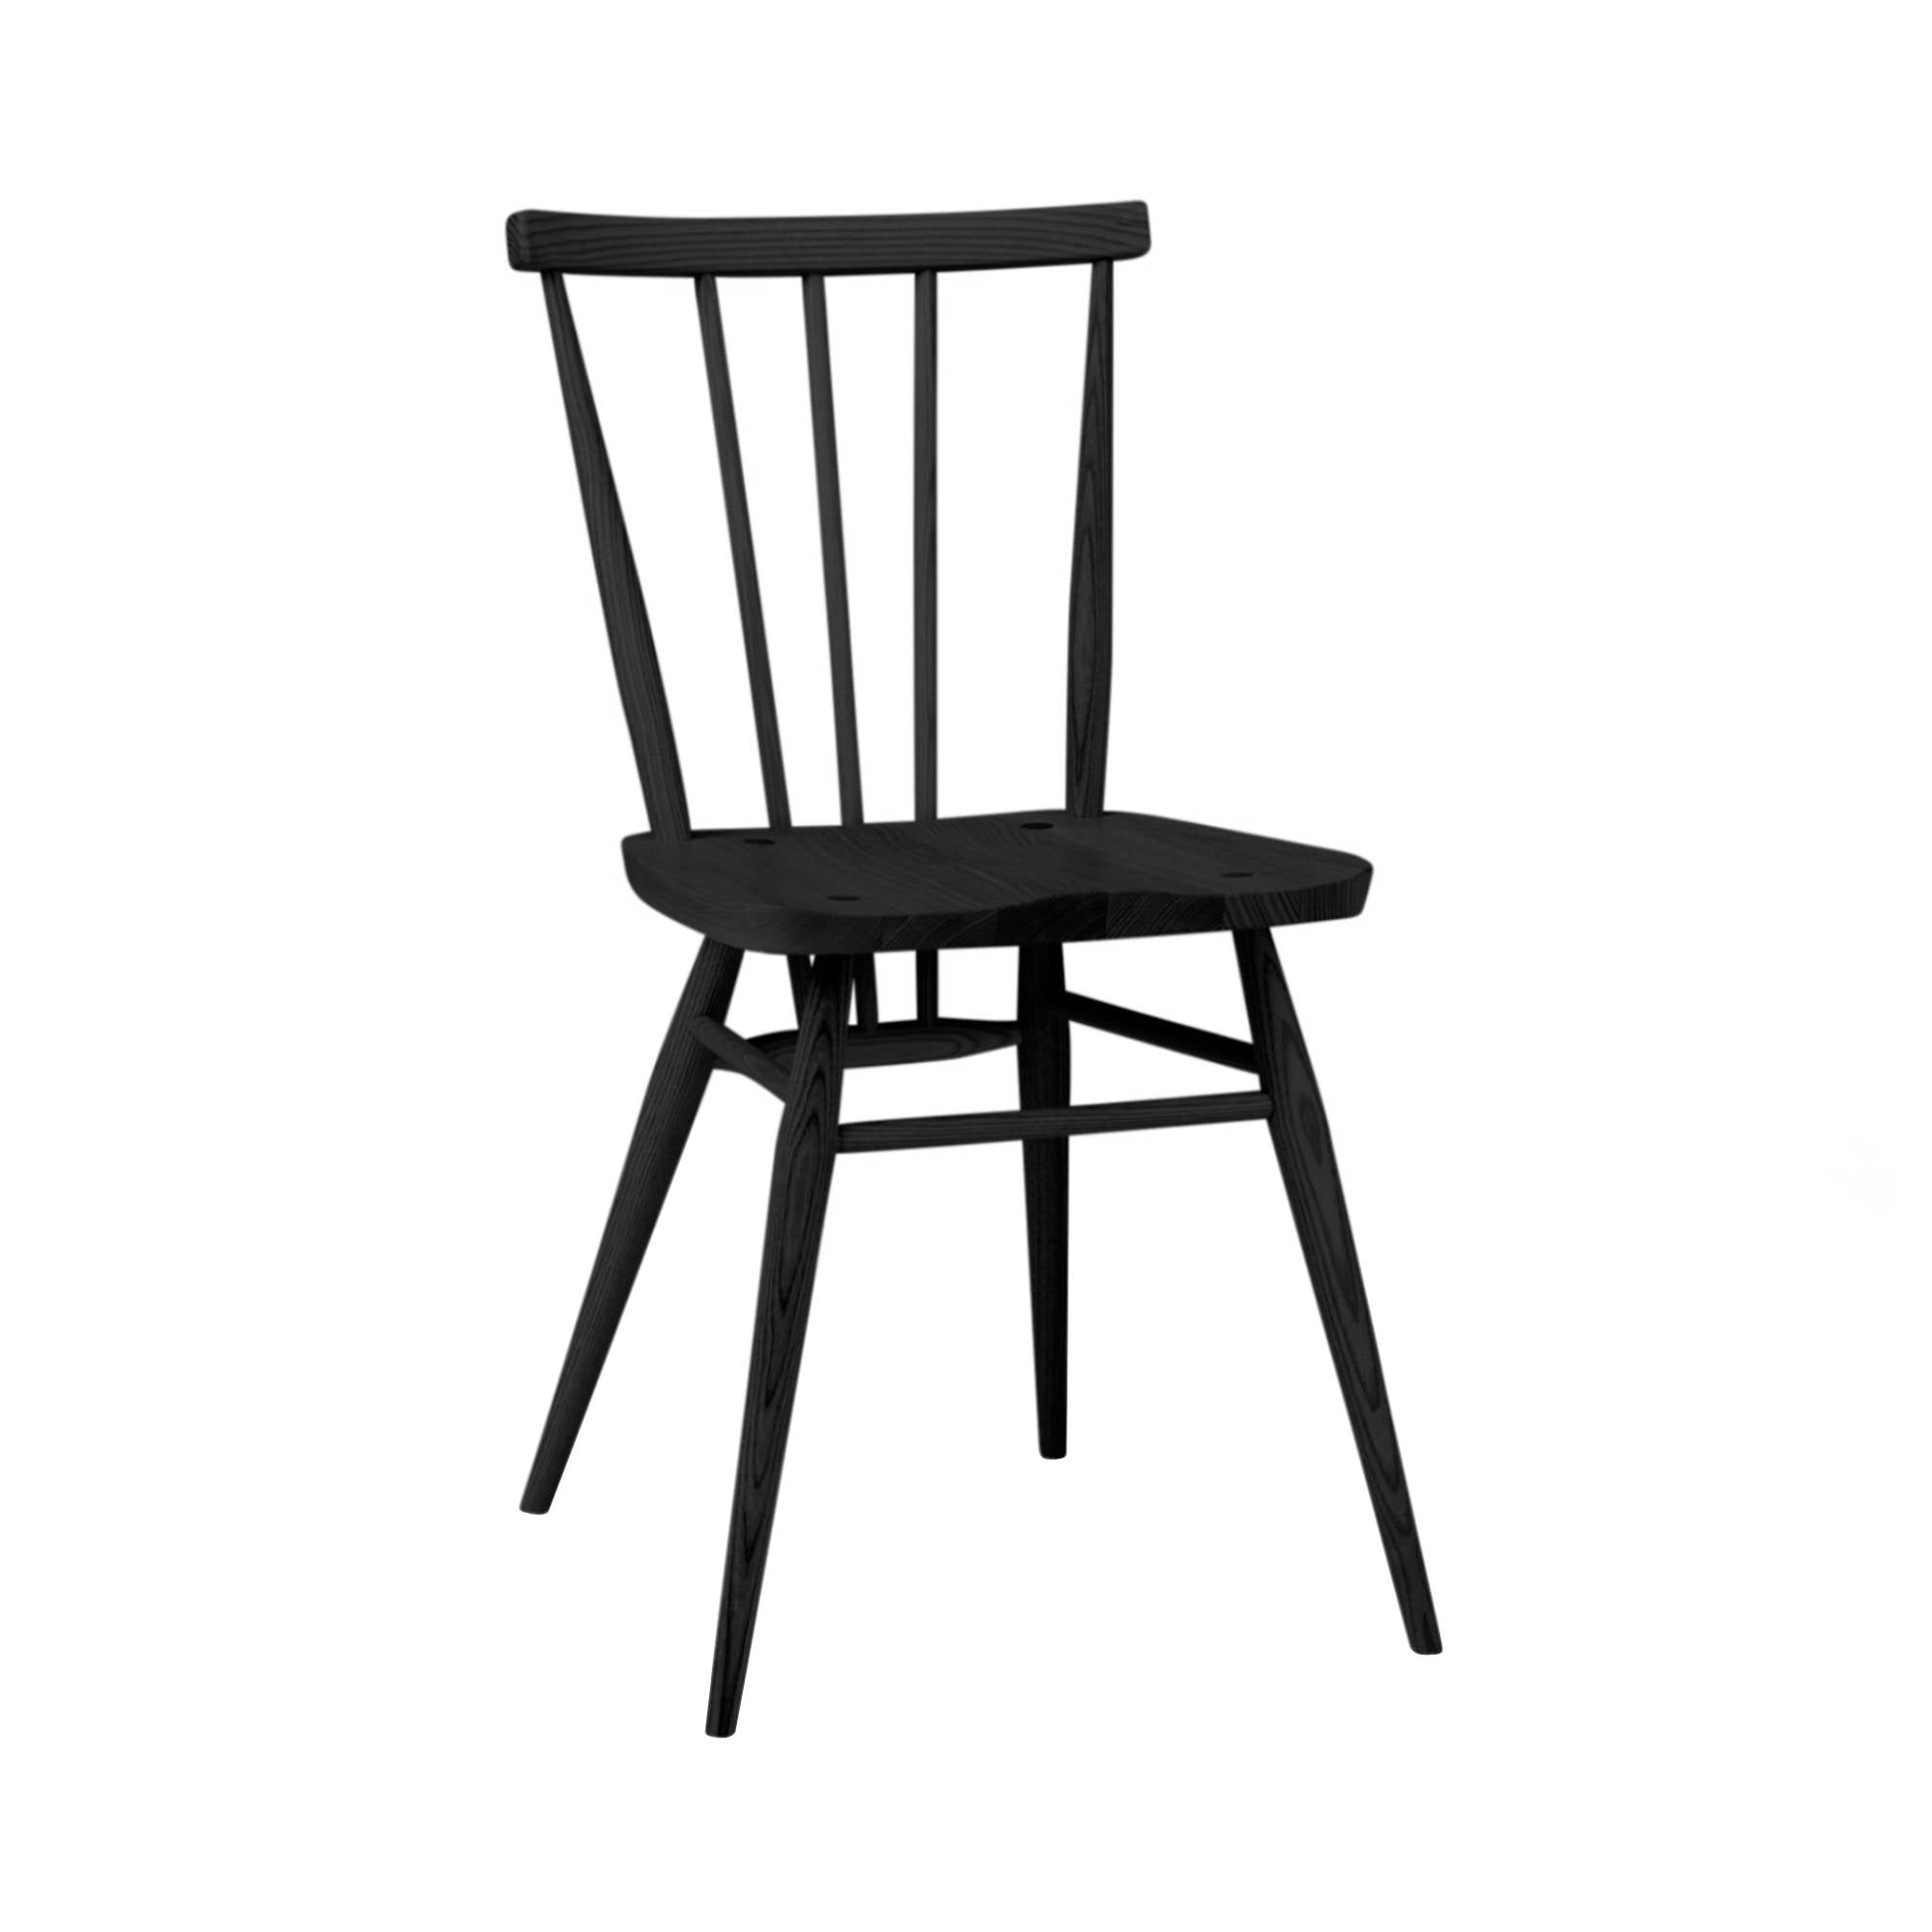 Originals All-Purpose Chair: Stained Black